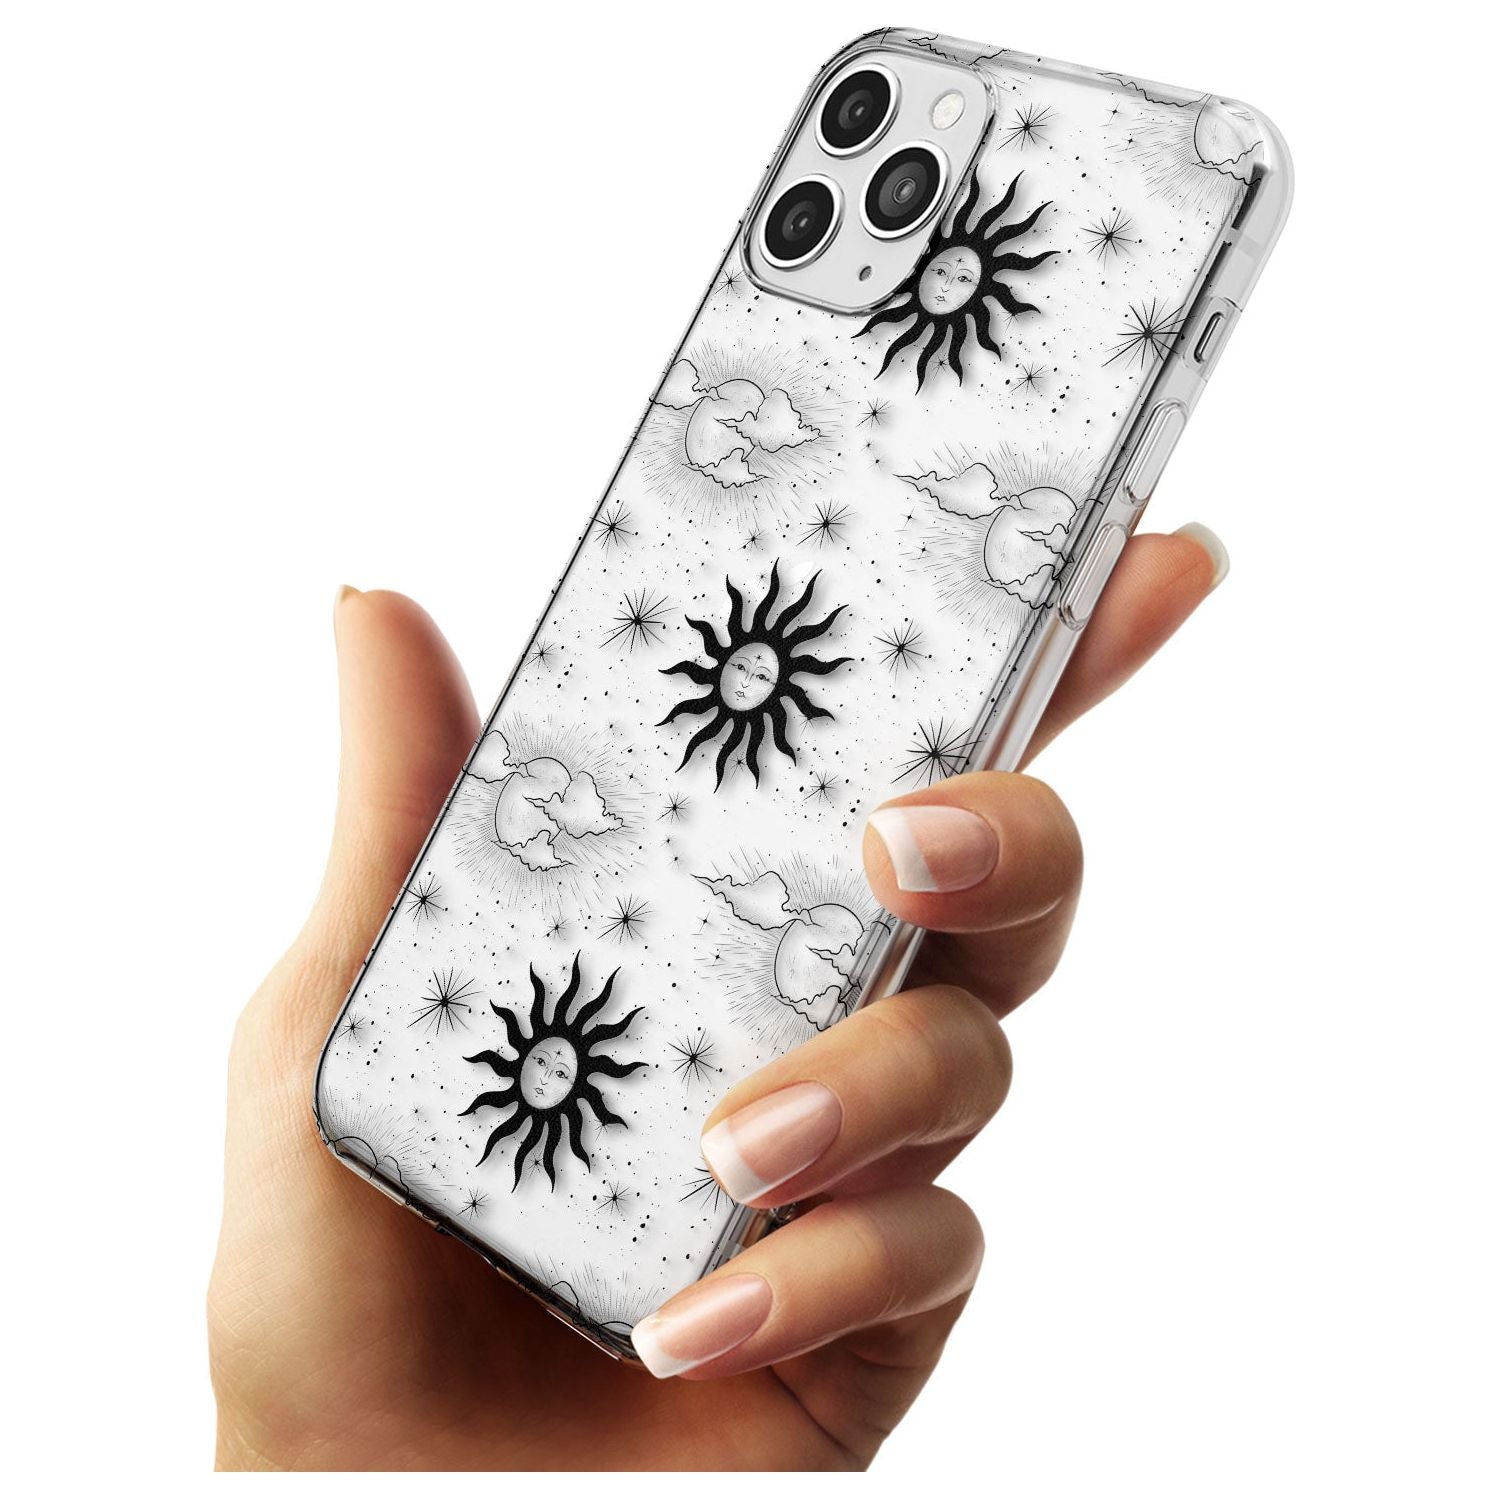 Suns & Clouds Vintage Astrological Slim TPU Phone Case for iPhone 11 Pro Max